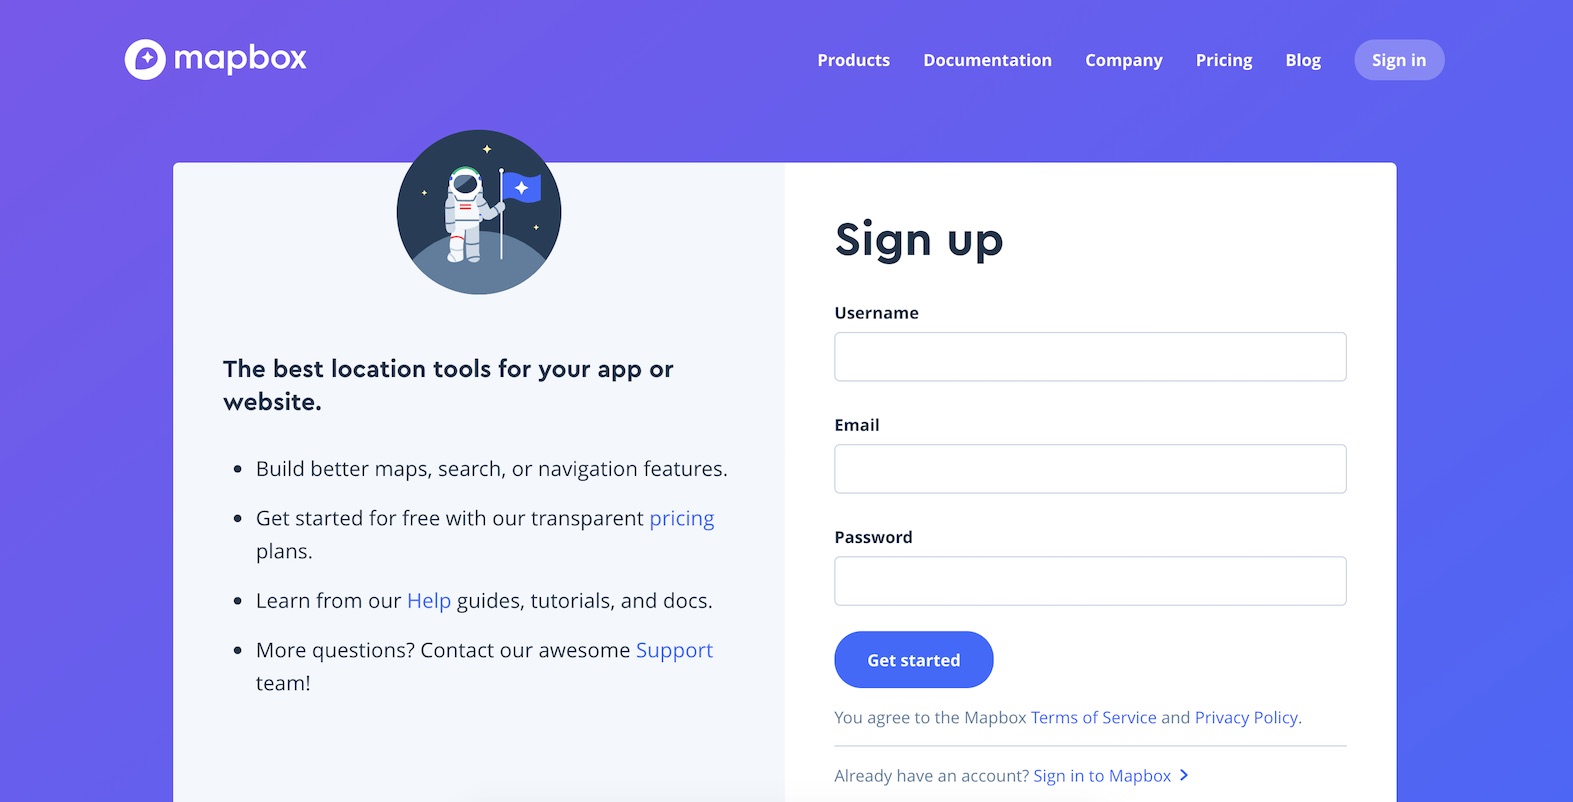 Sign up for a Mapbox account.